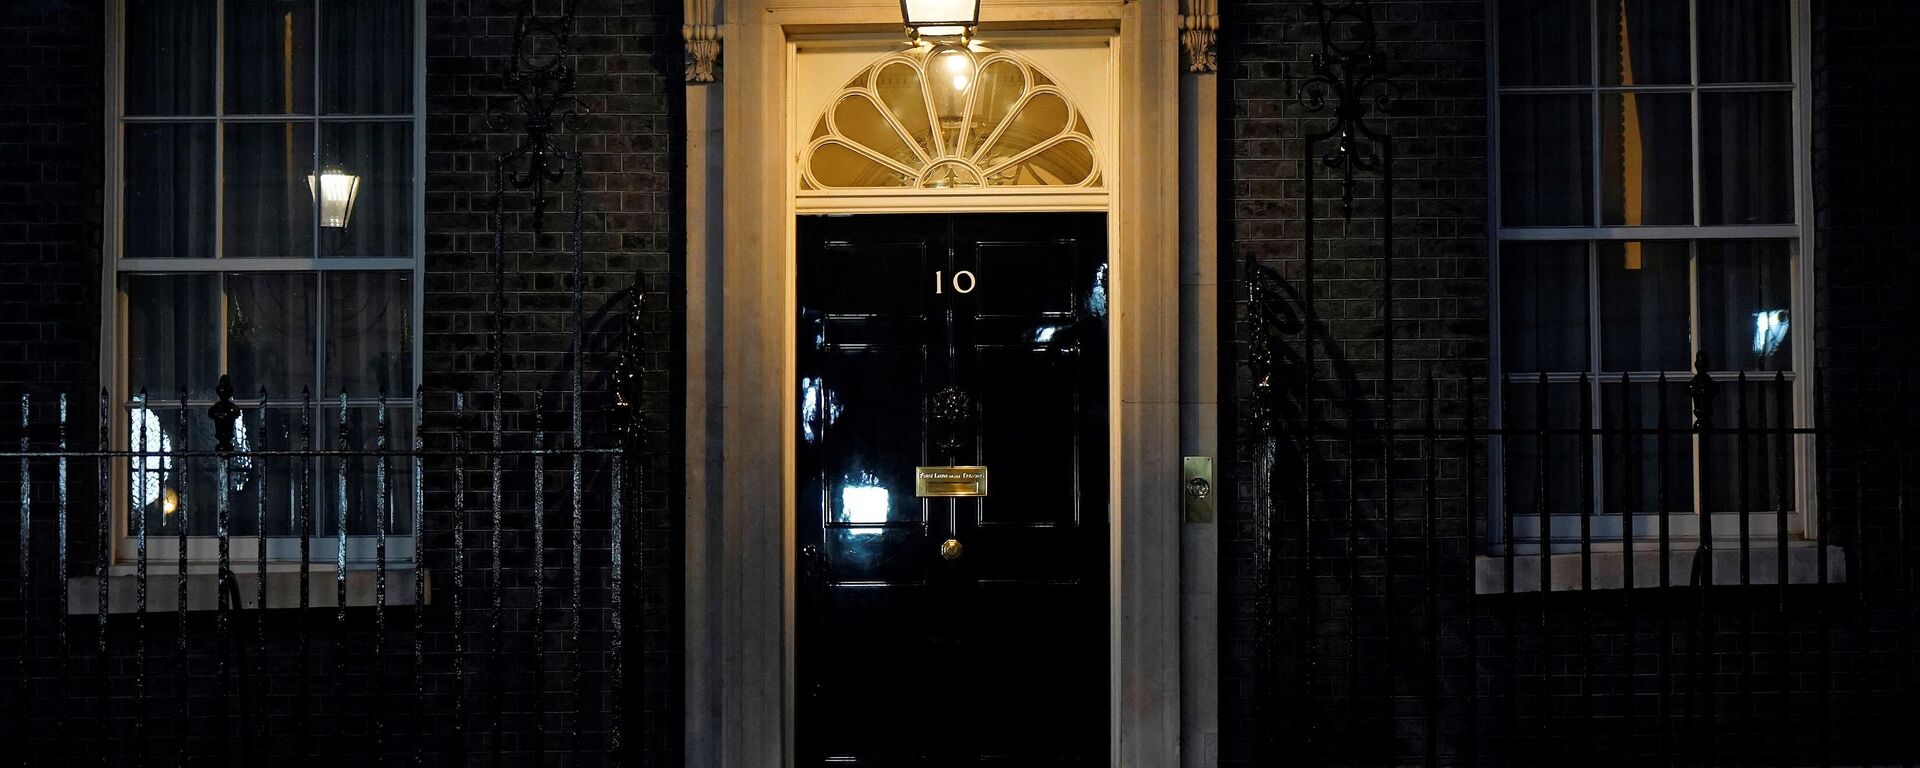 A light shines above the door of 10 Downing Street, the official residence of Britain's Prime Minister, in central London on January 31, 2022 - Sputnik International, 1920, 23.02.2022